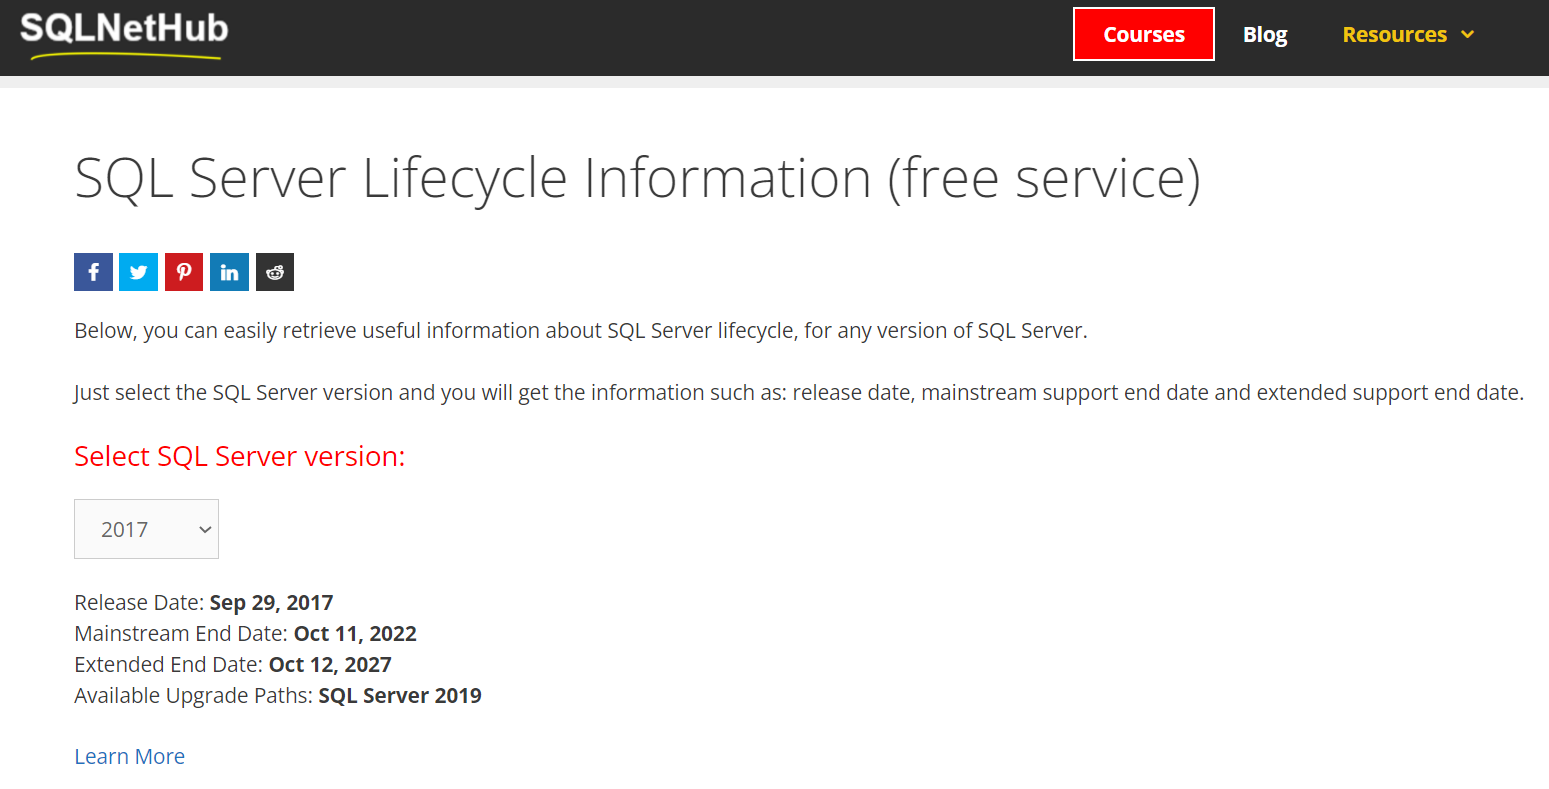 SQL Server Lifecycle Information - free service on SQLNetHub